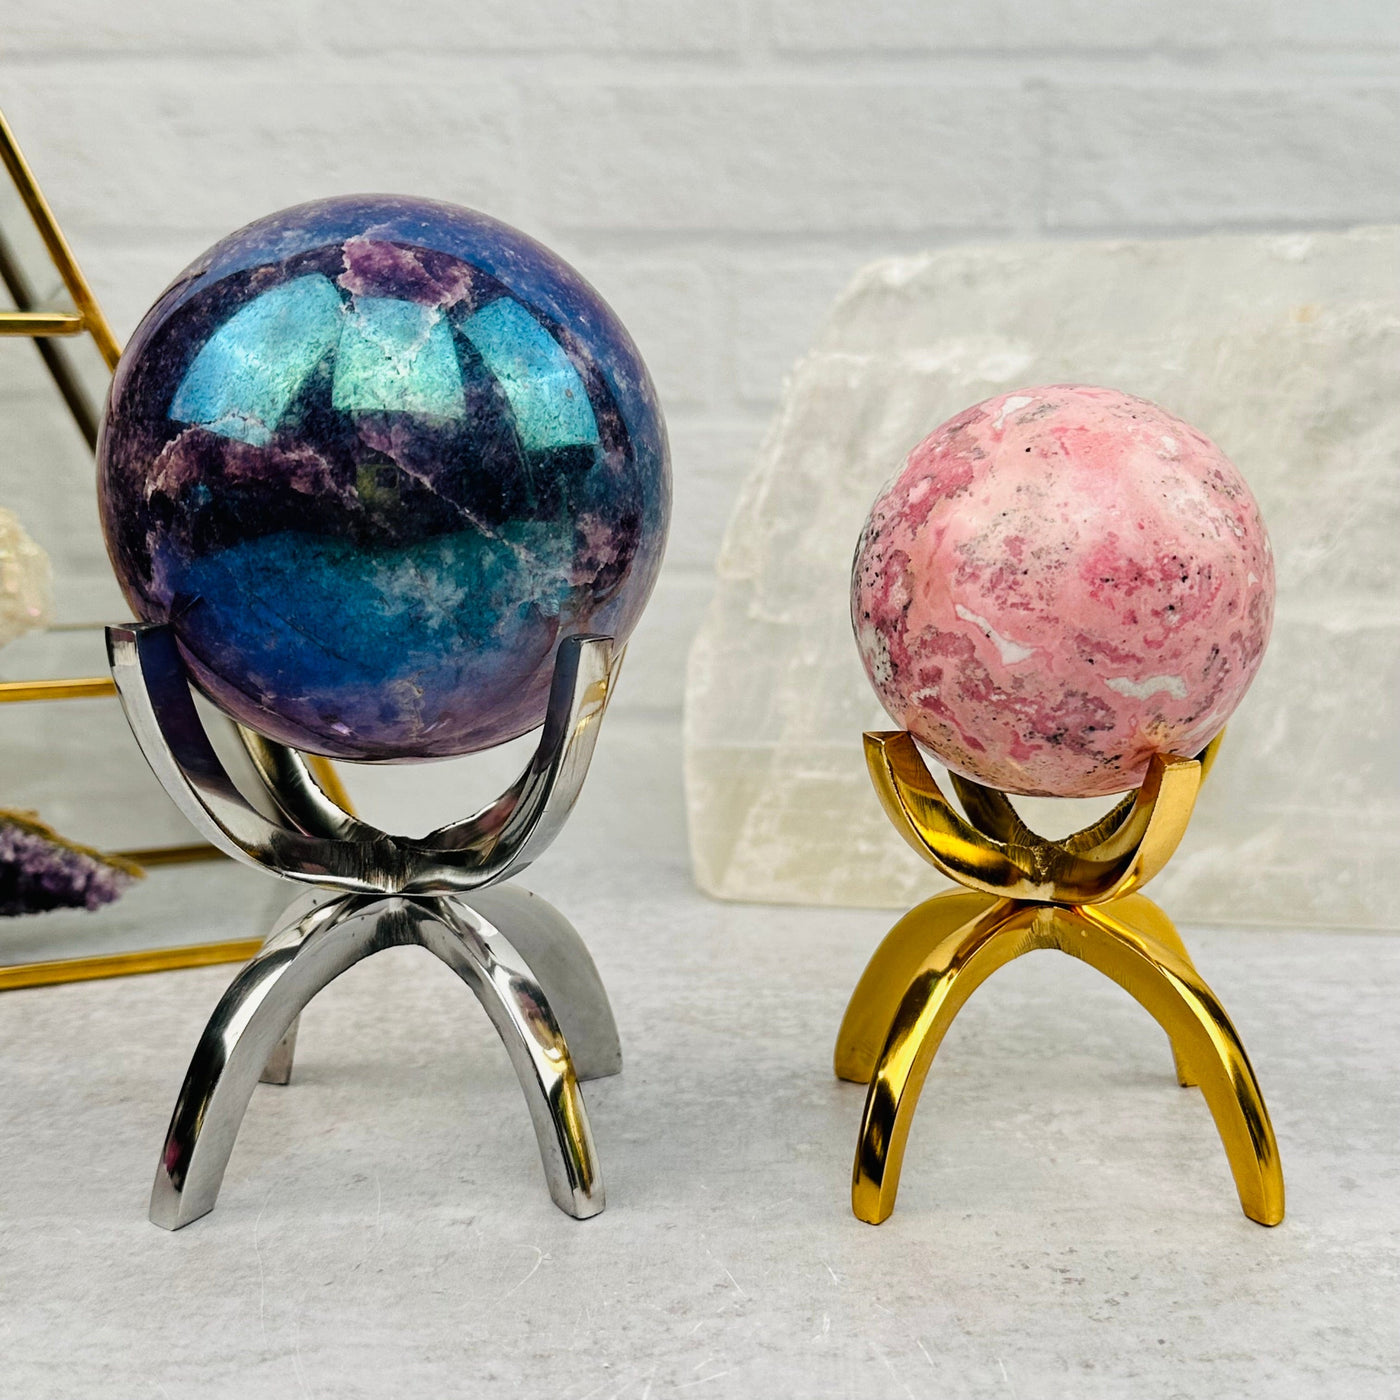 Metal Claw Stand - Sphere Holder displayed as home decor 